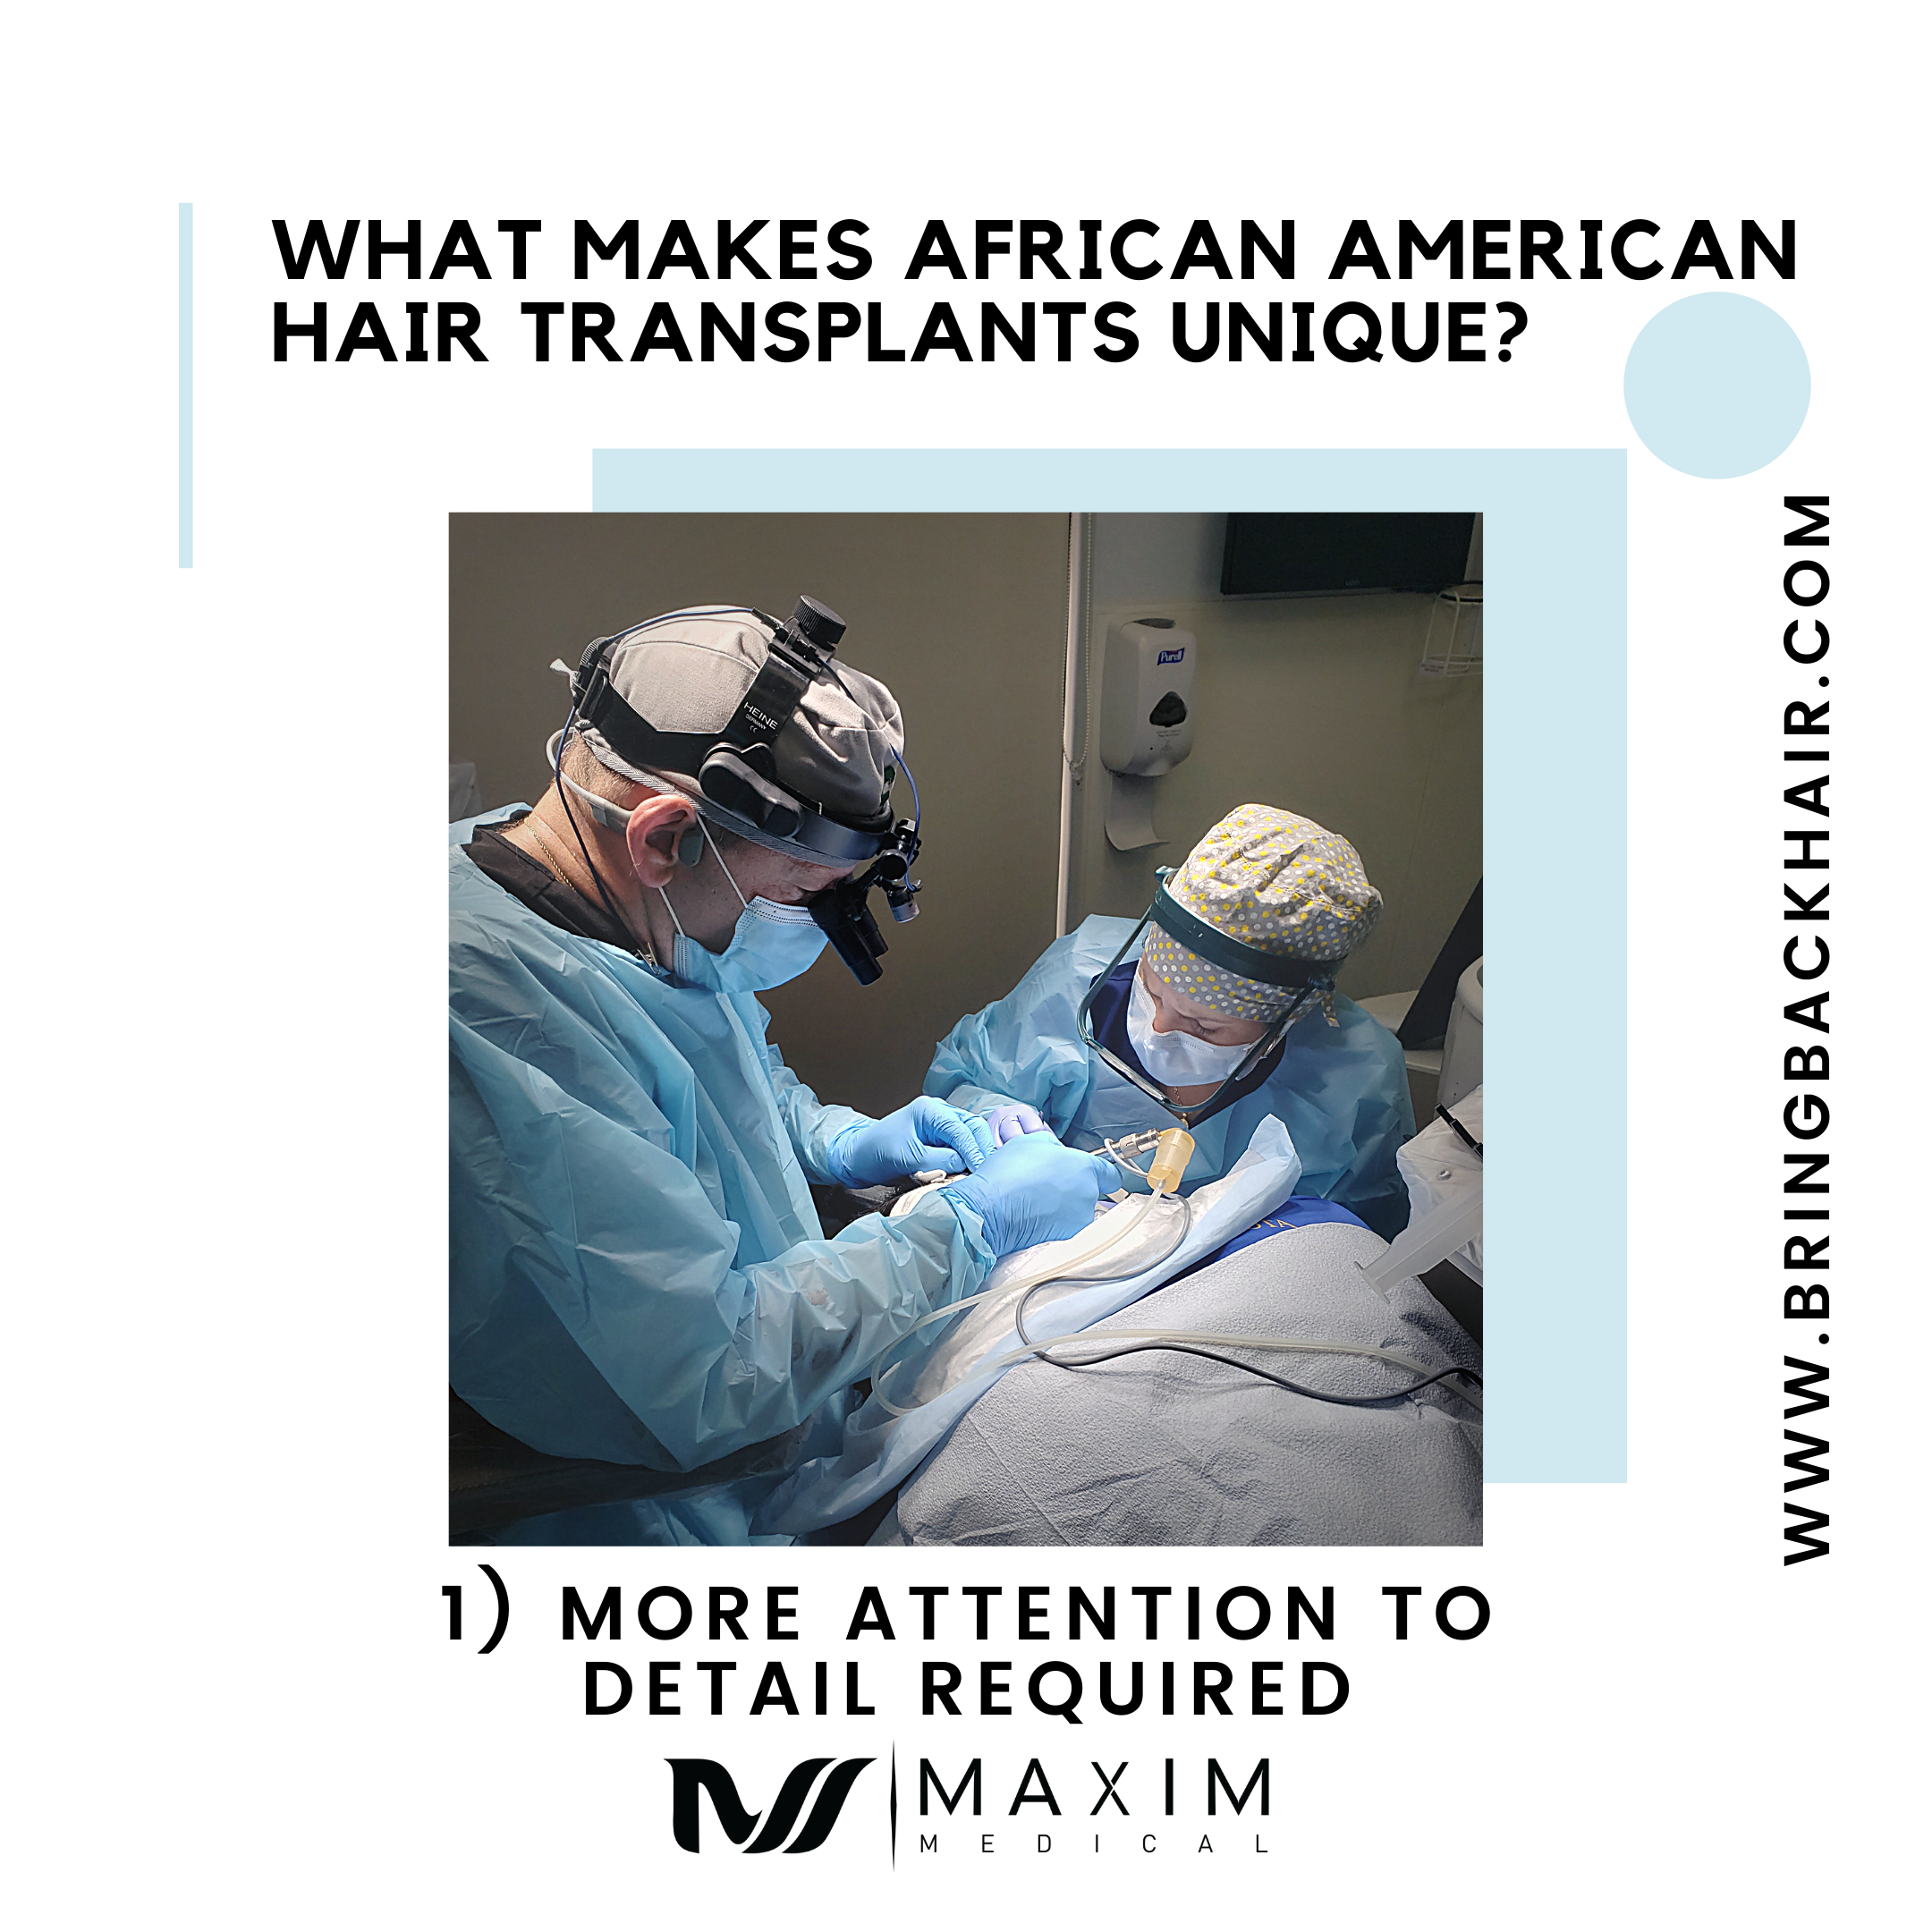 1. More Attention To Detail Required
Using devices such as our Mamba FUE device and Neograft technology can ease the process of hair transplants for African American hair. However, the challenges are still present despite the technology. African American FUE procedures are a bit more challenging than other procedures because the hair restoration surgeon must overcome the natural curl of each hair follicle. However, the advantages of having an FUE procedure are immense as opposed to other approaches.